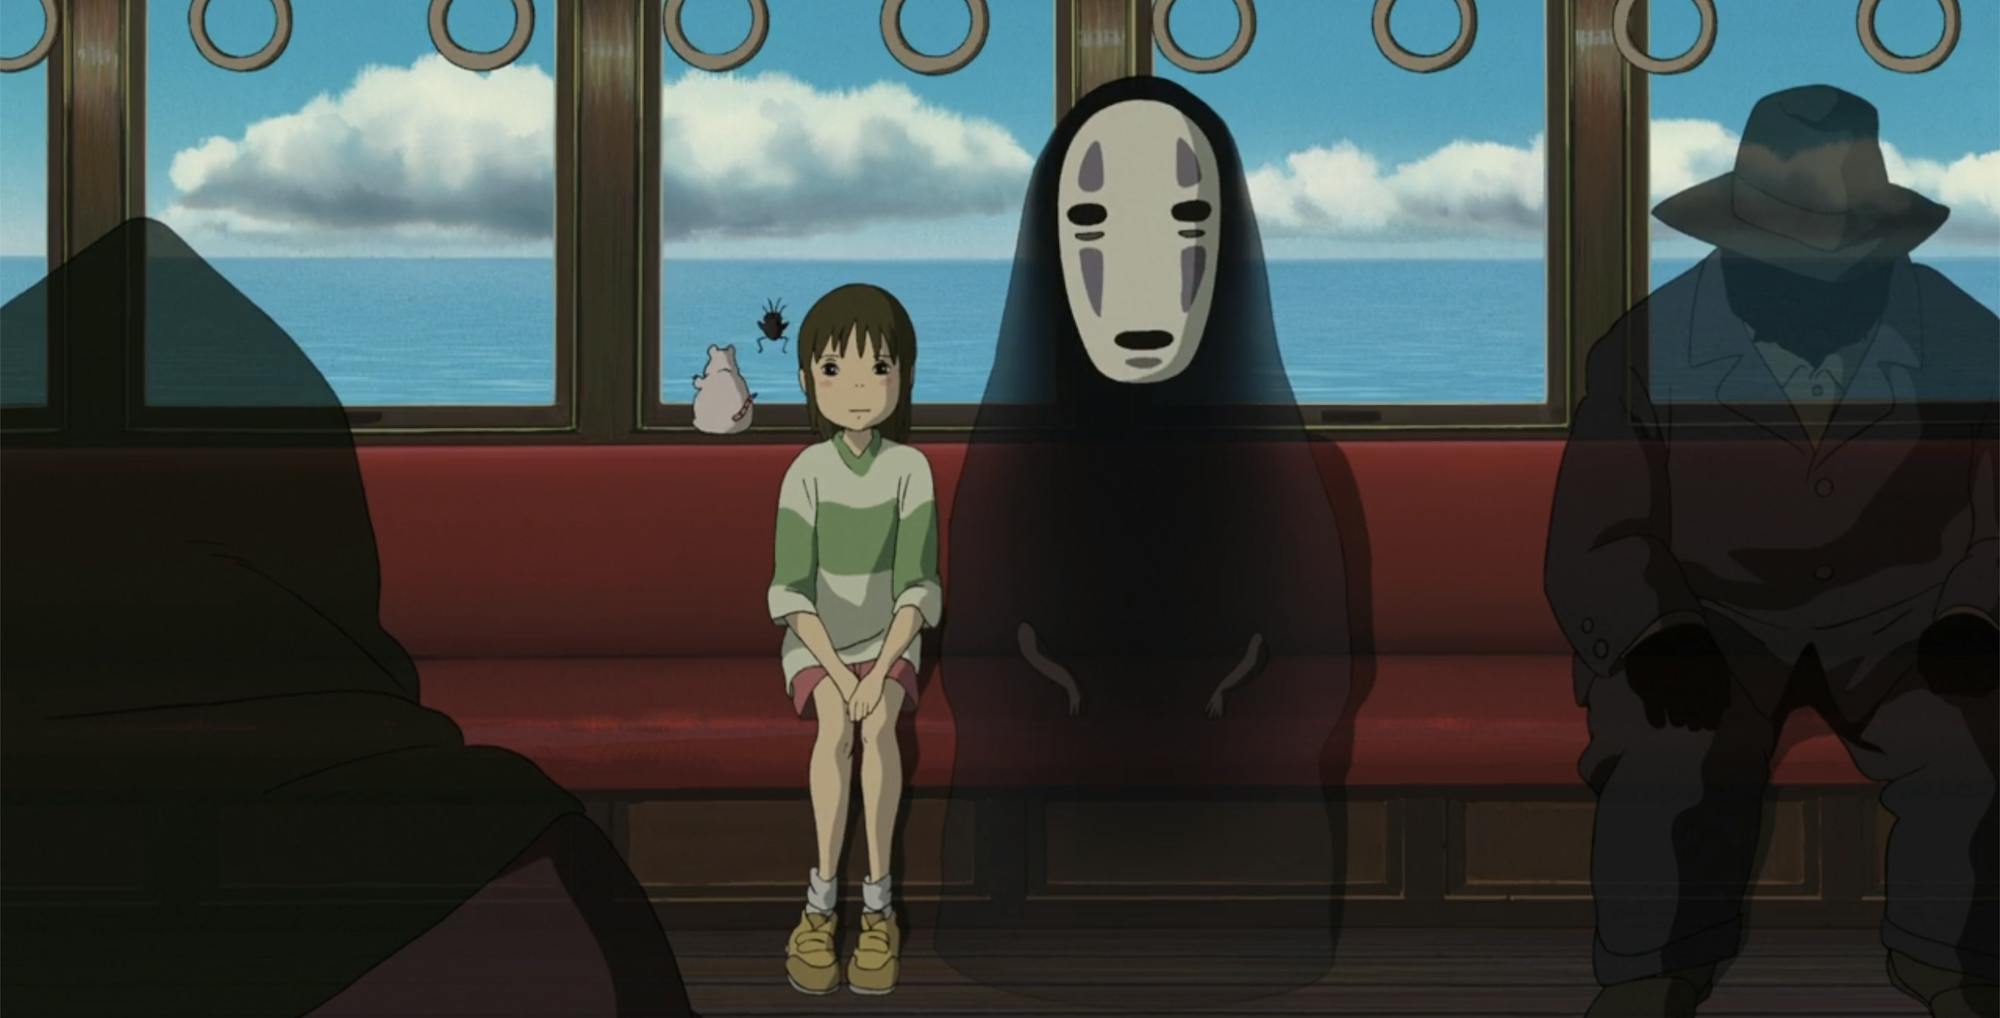 best anime services - spirited away on hbo max, image of a little girl sitting next to a ghost on a train